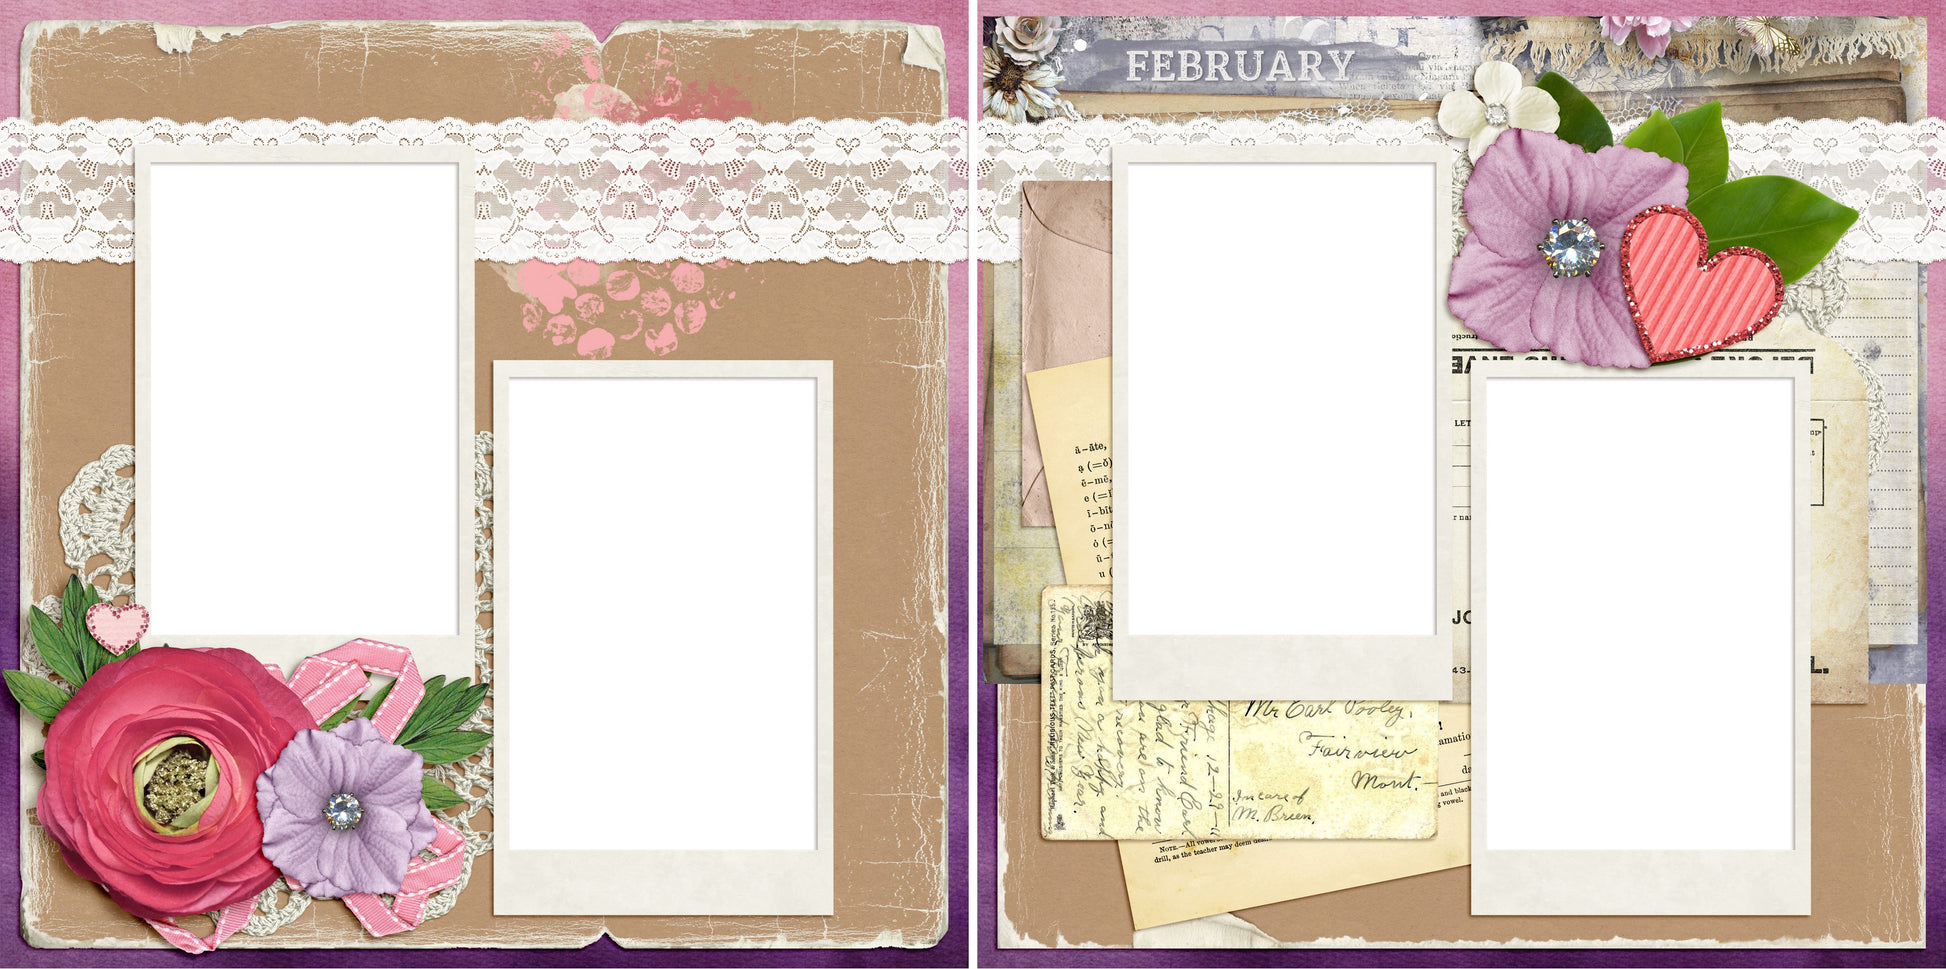 February - Digital Scrapbook Pages - INSTANT DOWNLOAD - EZscrapbooks Scrapbook Layouts Months of the Year